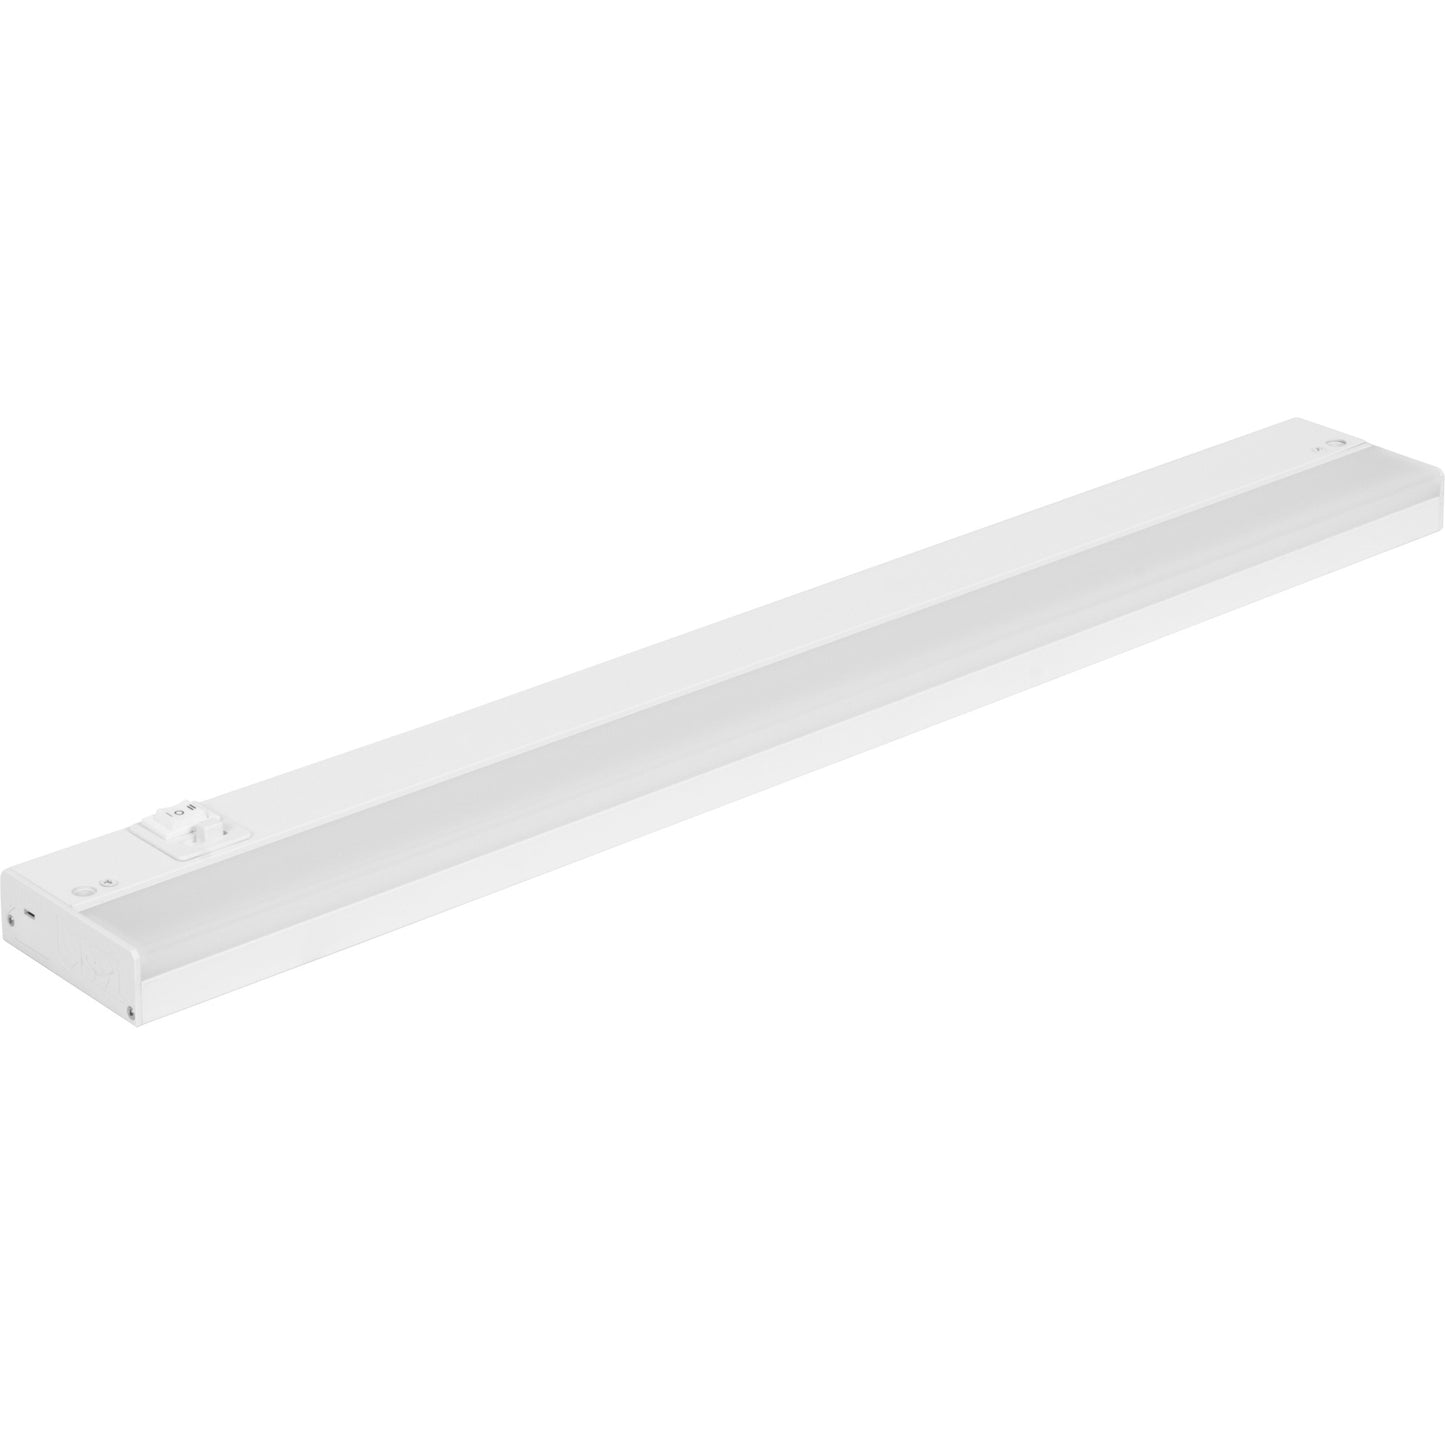 Task Lighting 23-15/16" 120-Volt Bar Light, Dimmable and 3-Color Selectable, L-BL24